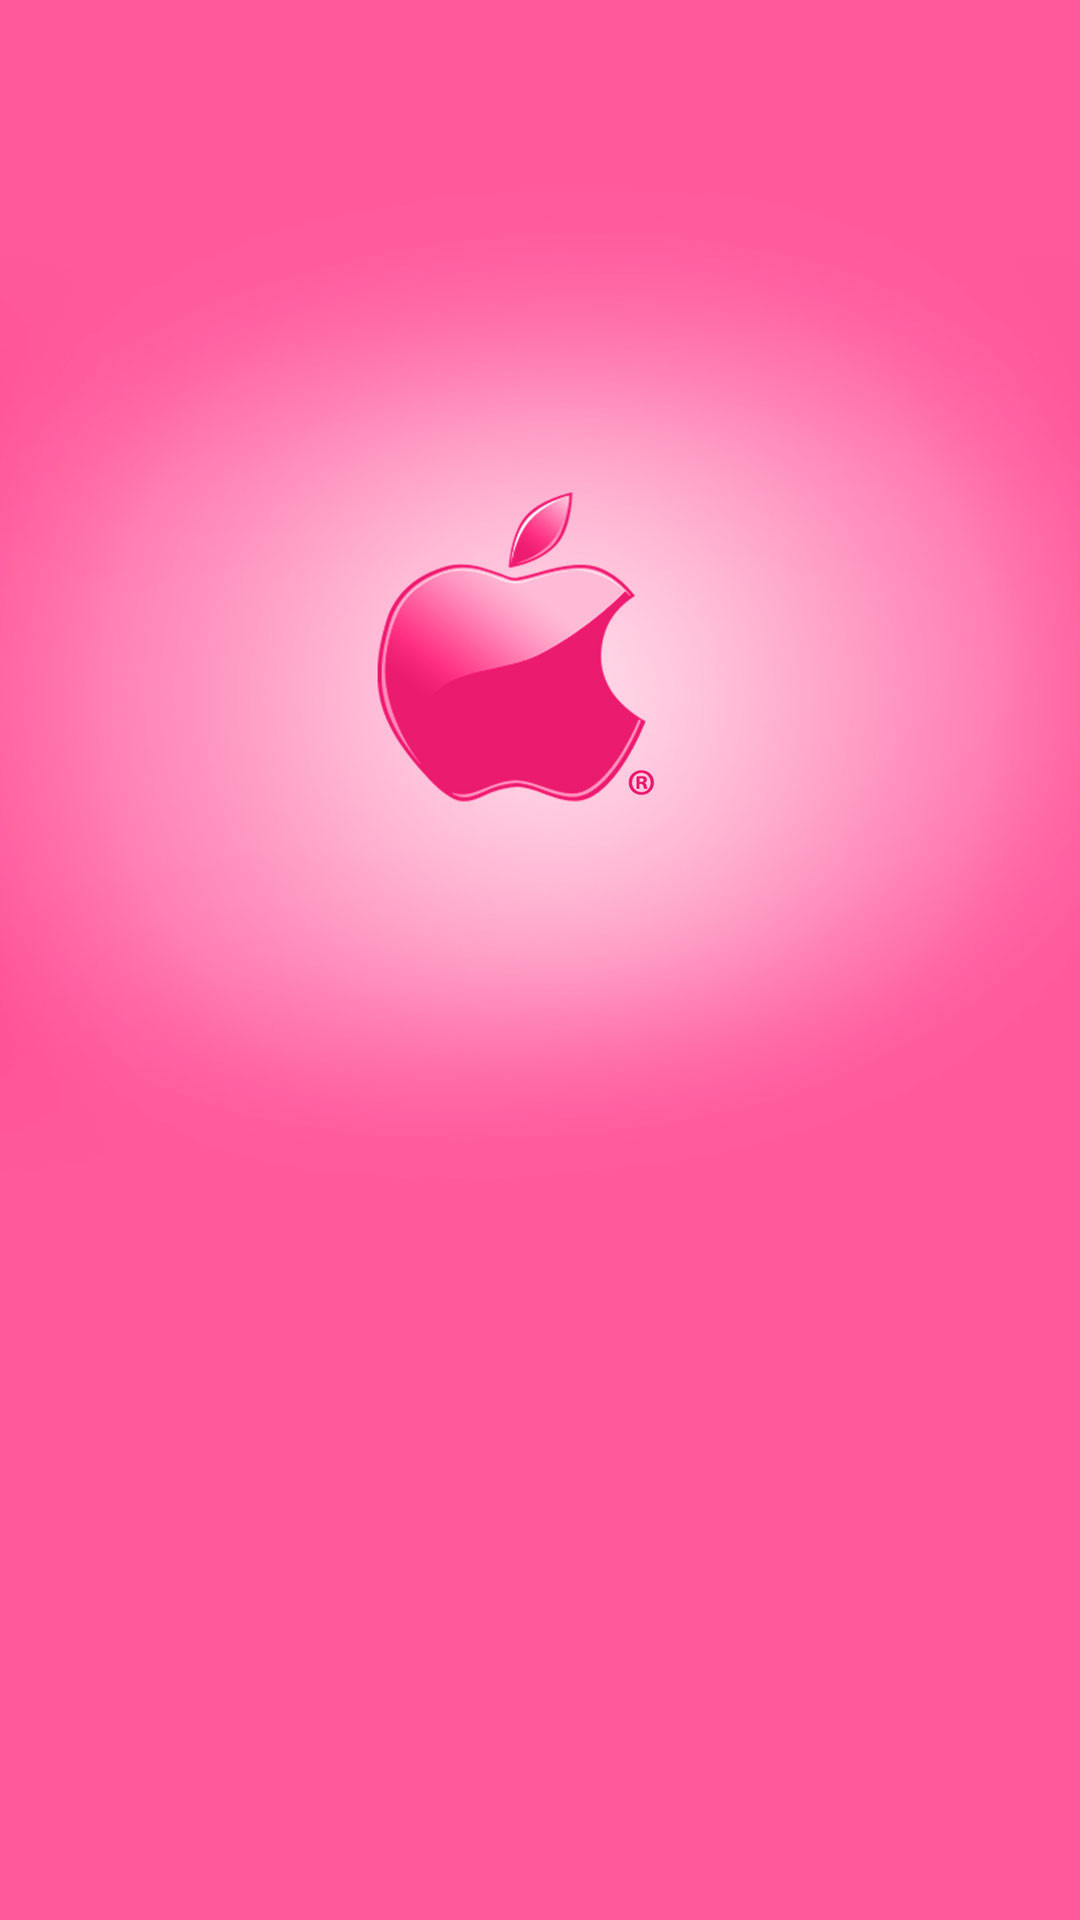 1080x1920 Pink iPhone Wallpapers8. “